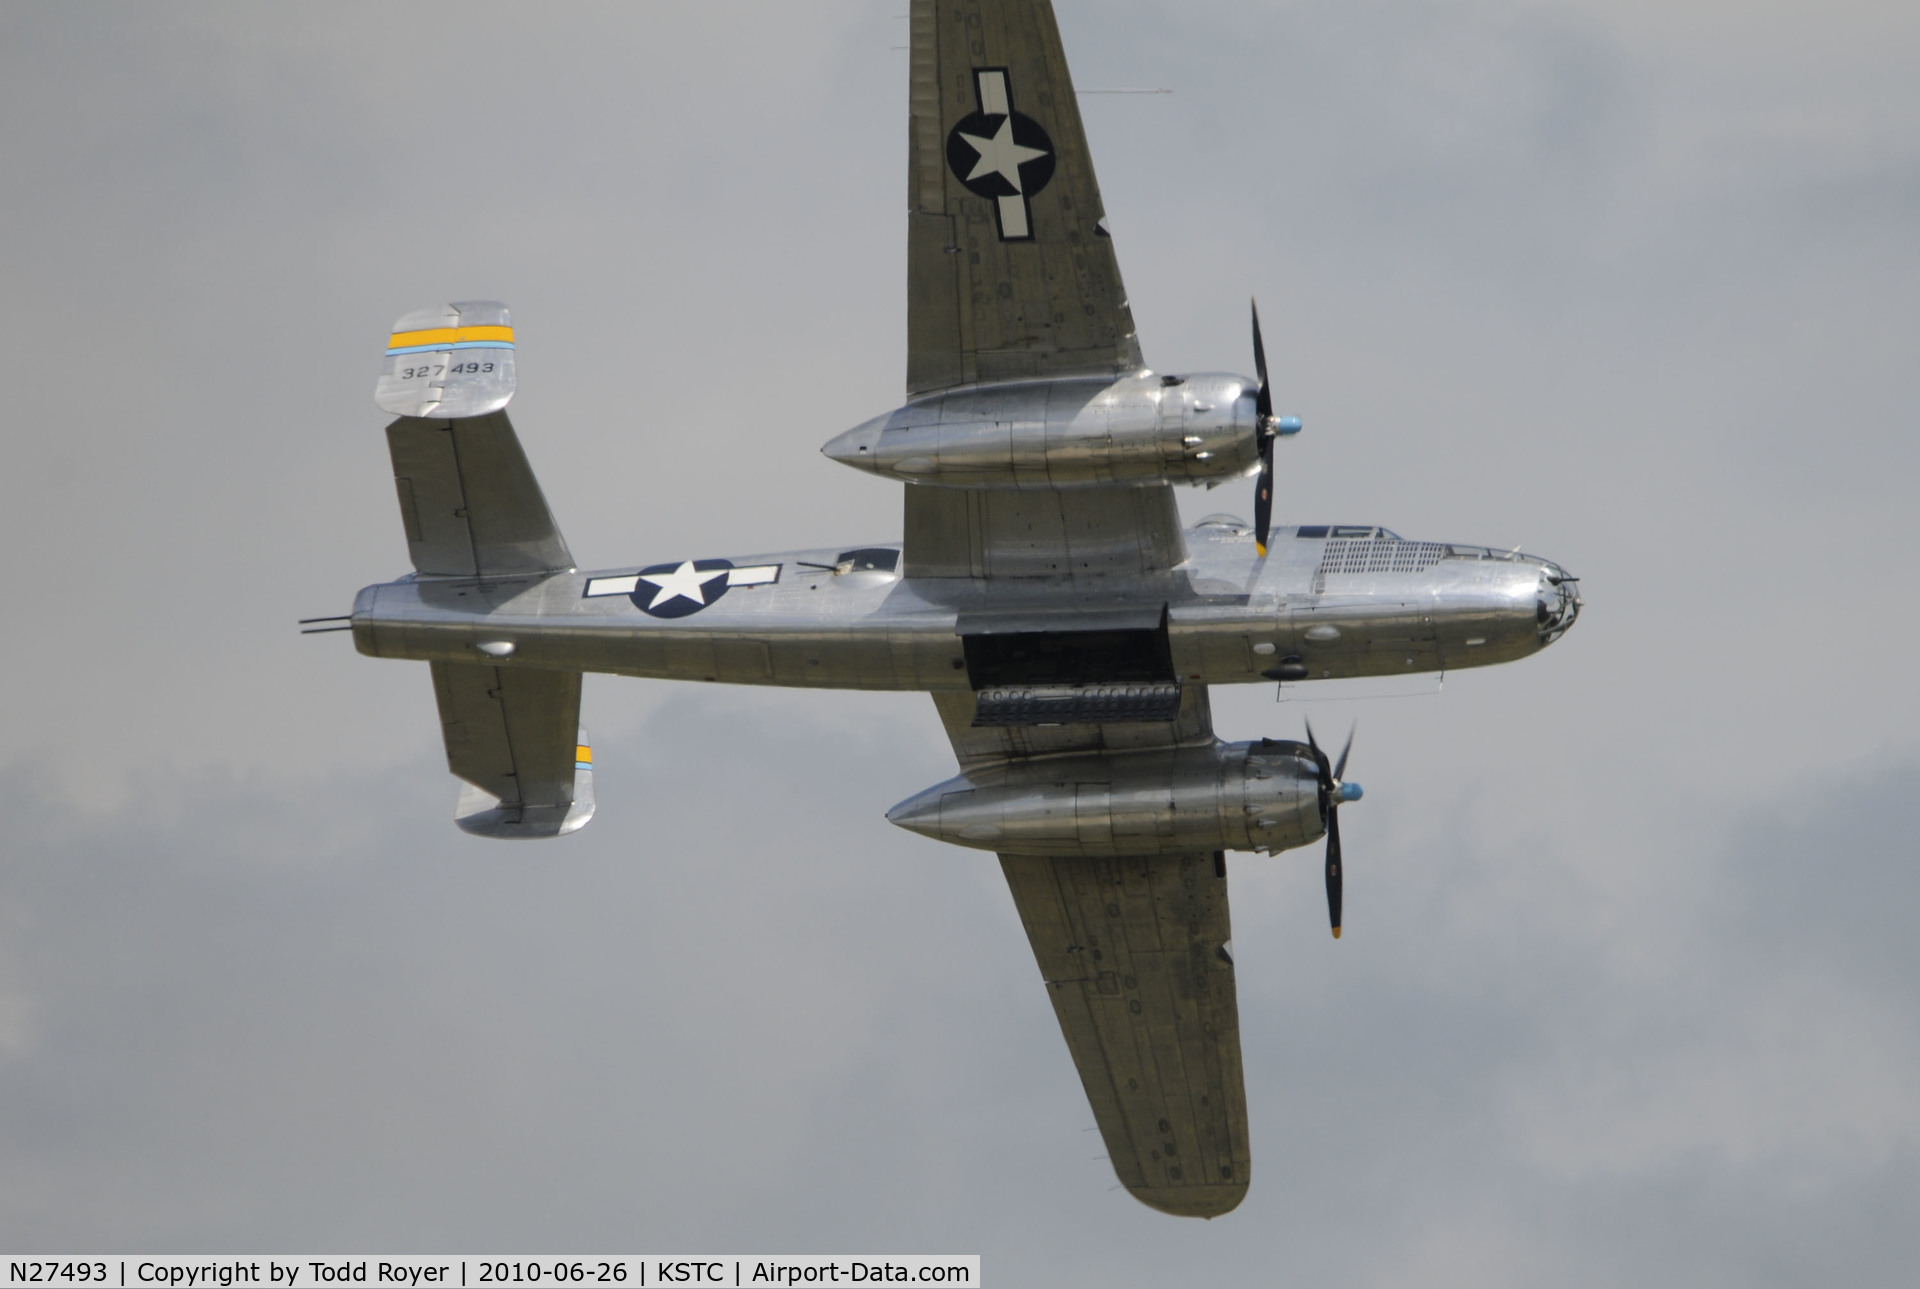 N27493, 1944 North American TB-25K Mitchell C/N 44-29869/108-33144, performing at the Great Minnesota Air Show